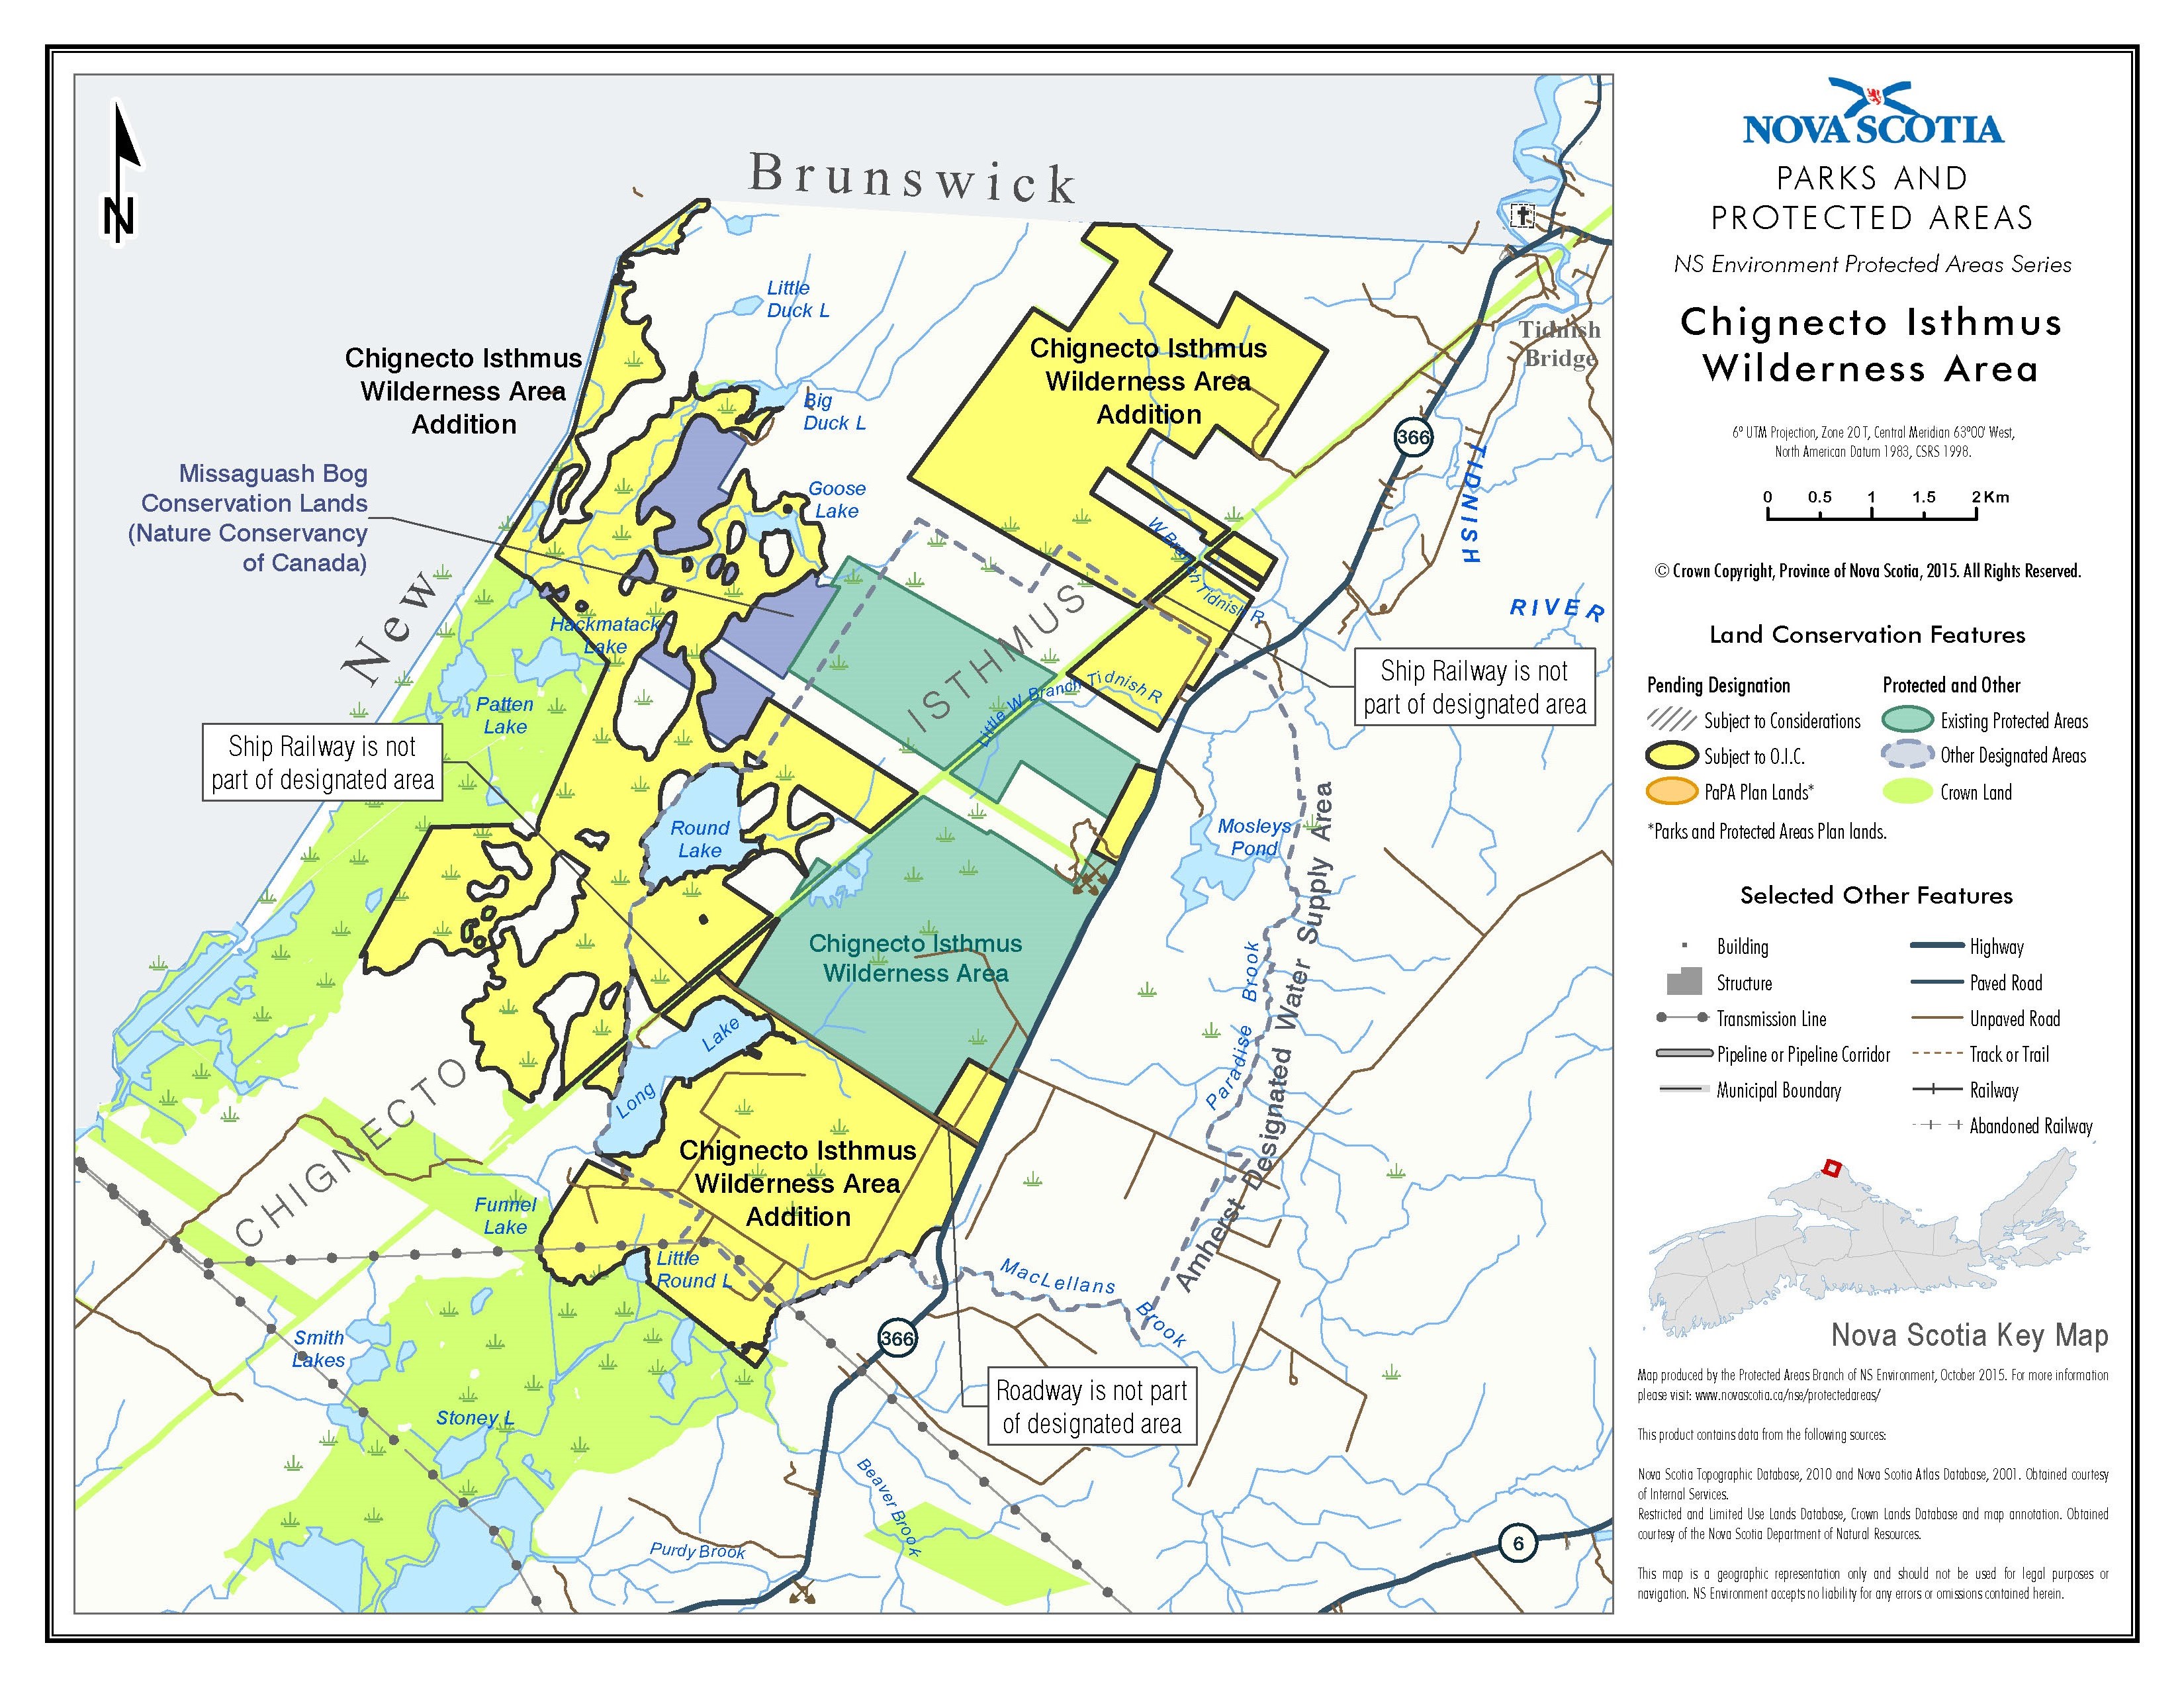 Map Showing Approximate Boundaries of 
Addition to Chignecto Isthmus Wilderness Area